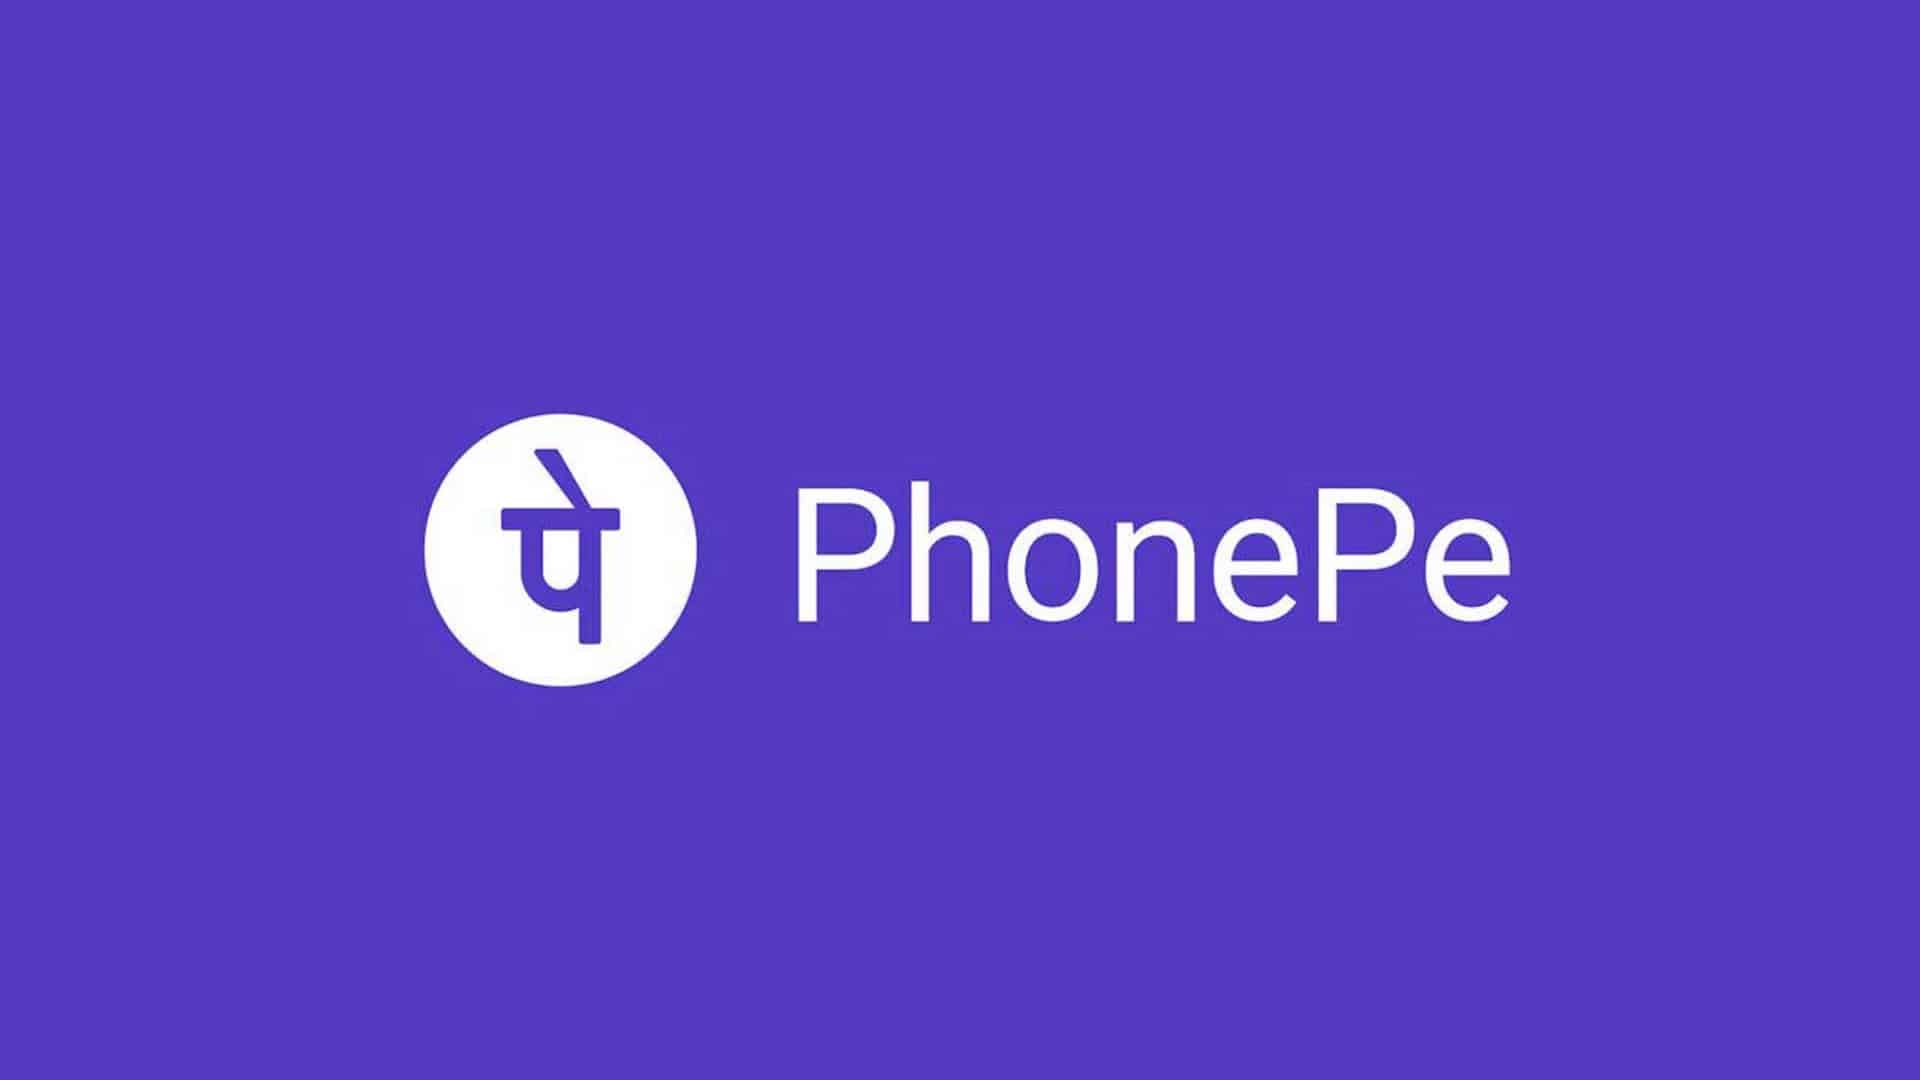 PhonePe gets $50 mn from Tencent but won't use it for India operations